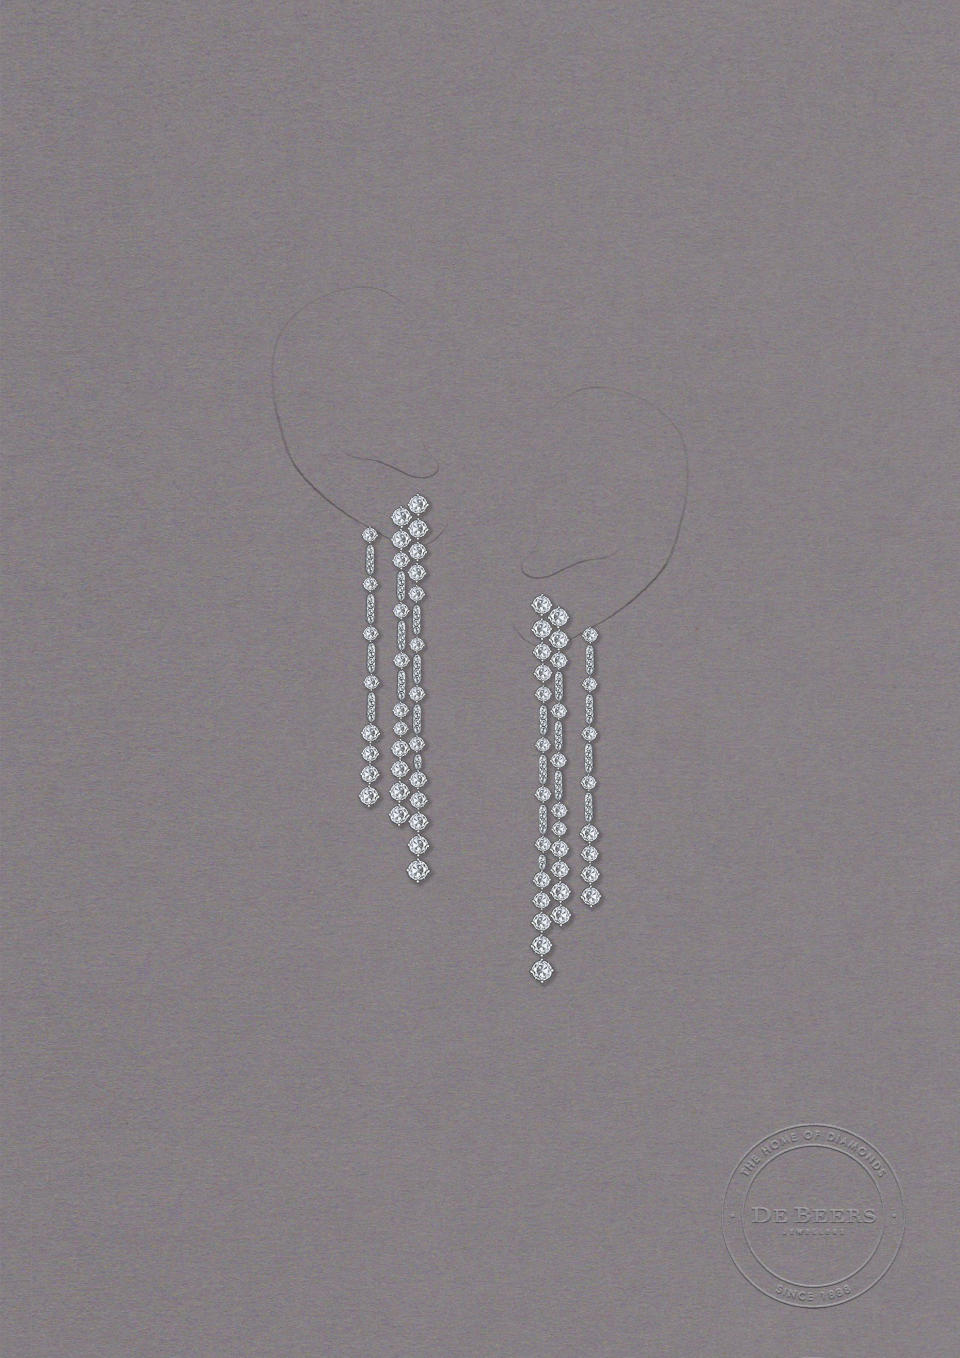 De Beers Arpeggia collection earrings, inspired by music. Worn by Taylor Swift at the 2024 Golden Globes.